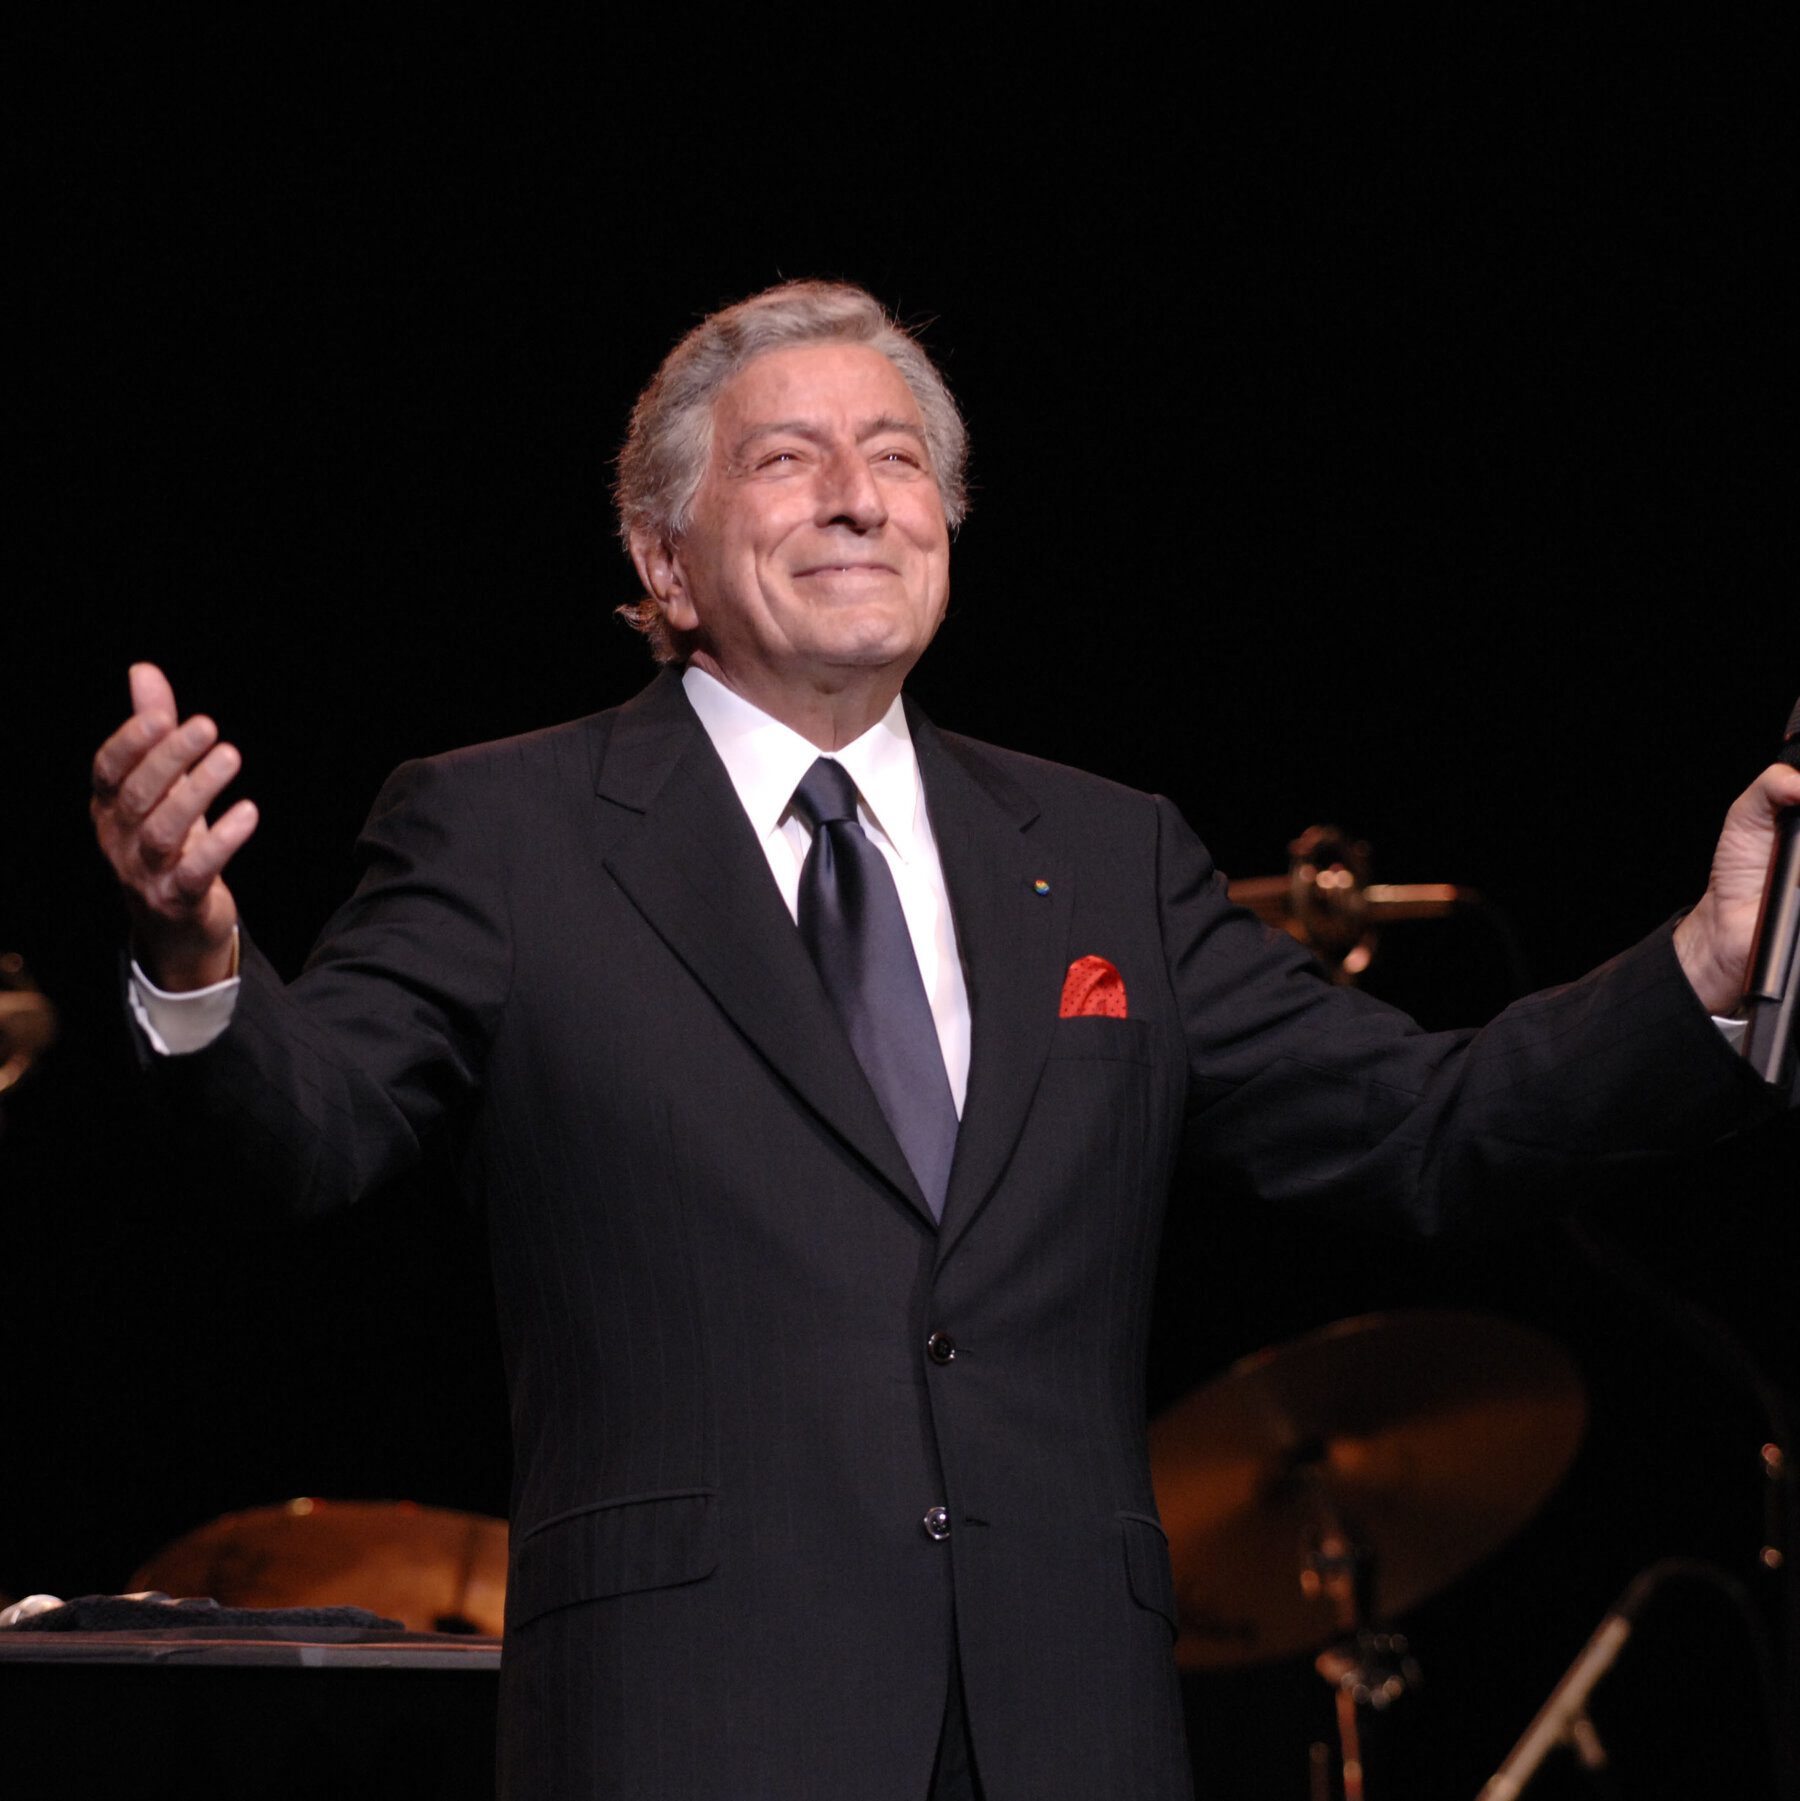 Tony Bennett: The Heart and Soul of American Music has passed away